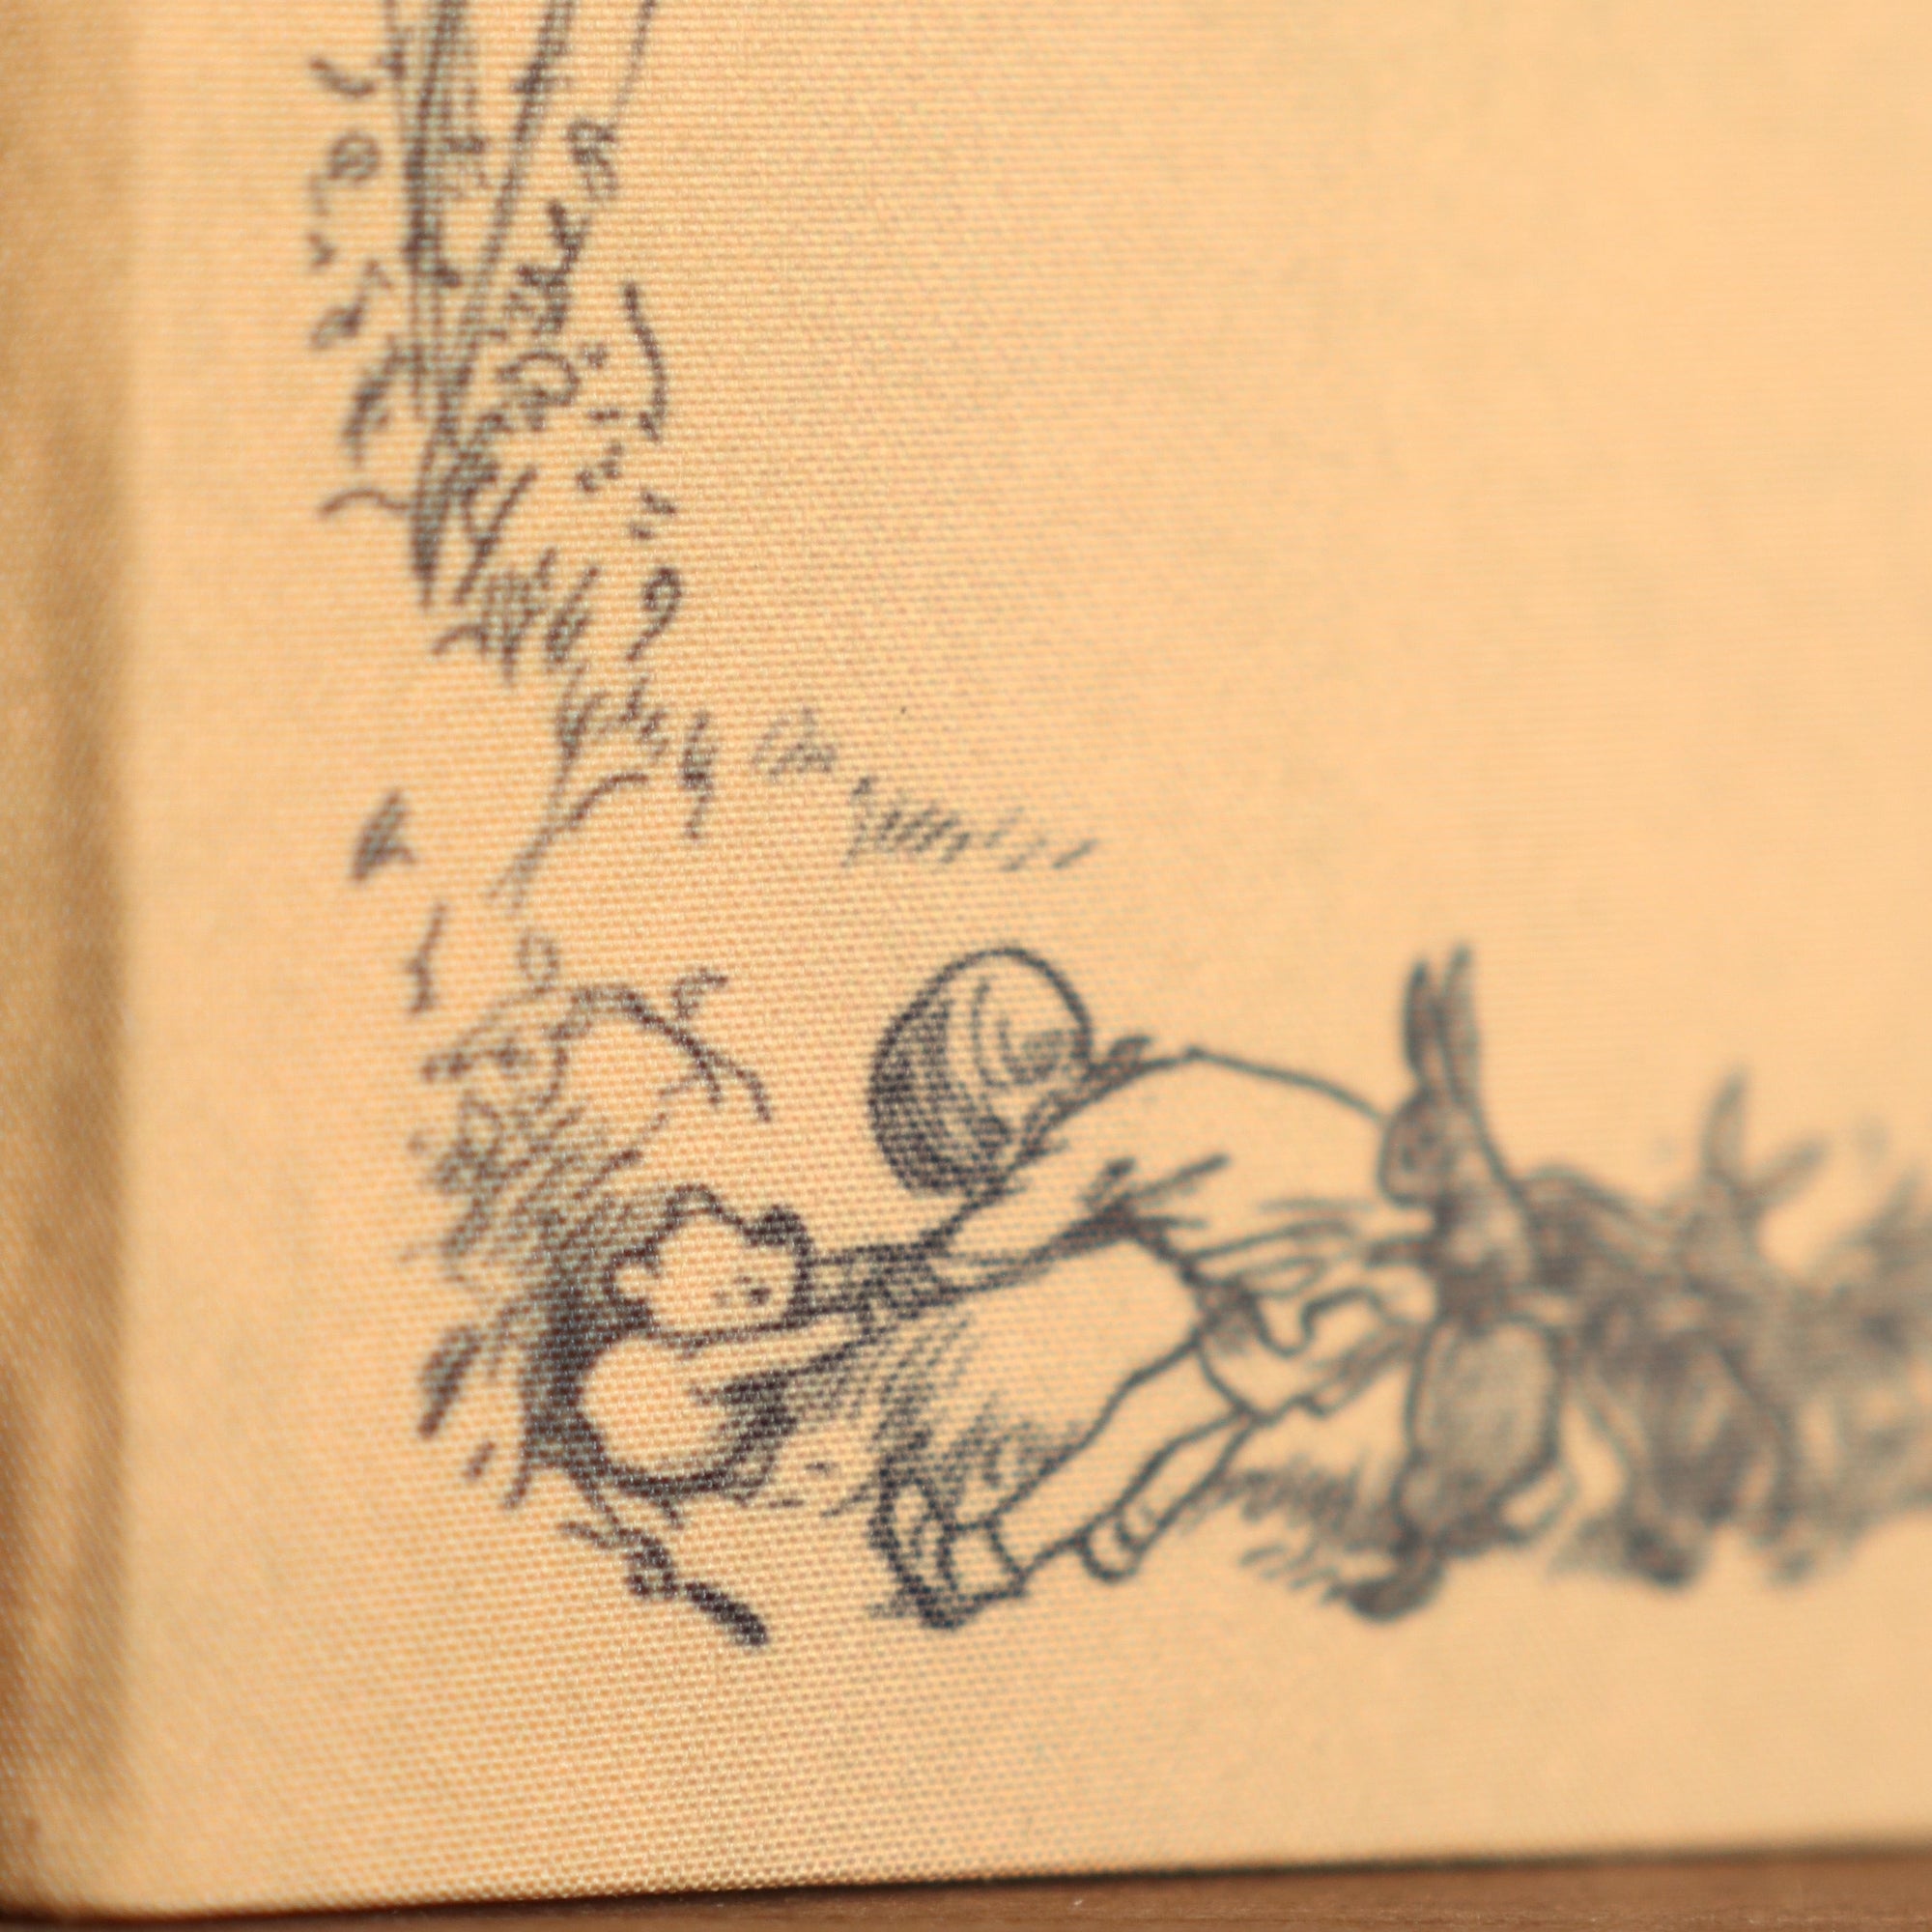 Winnie-the-Pooh by A. A. Milne &amp; E. H. Shepard 1926  Book Wallet